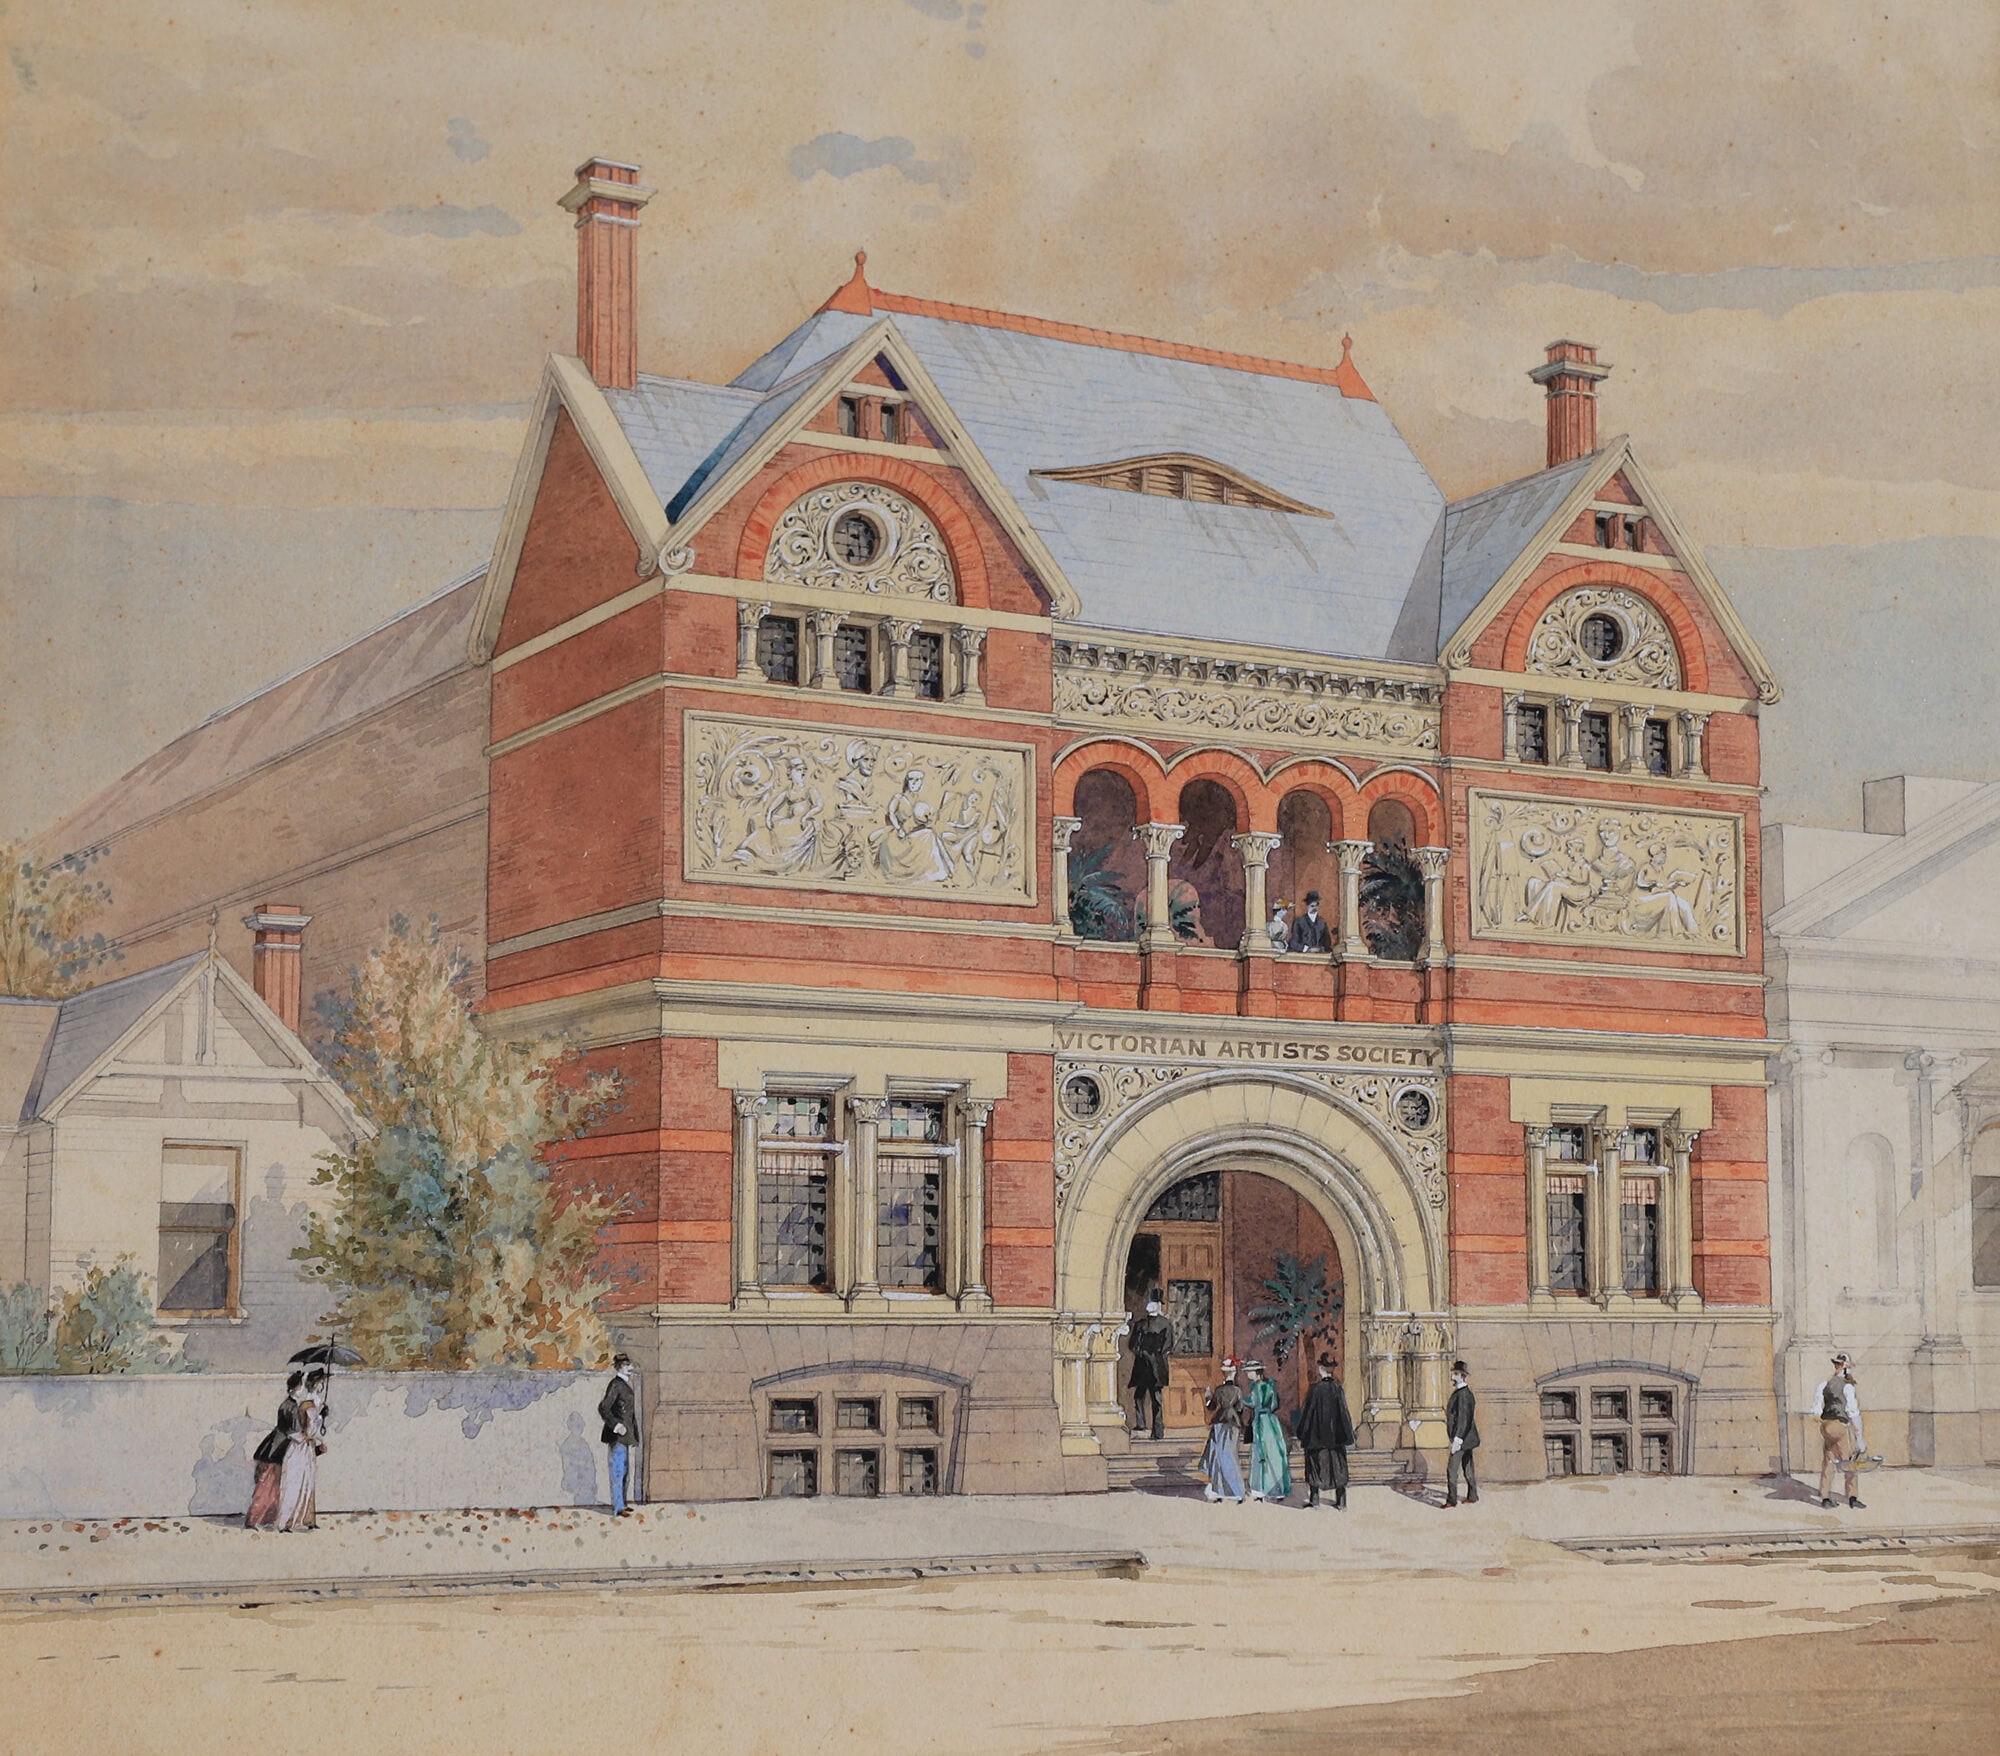 01B_HISTORY__Watercolour on board by Wiliam Tibbits_Painting of Building From Andrew MacKenzie (1)